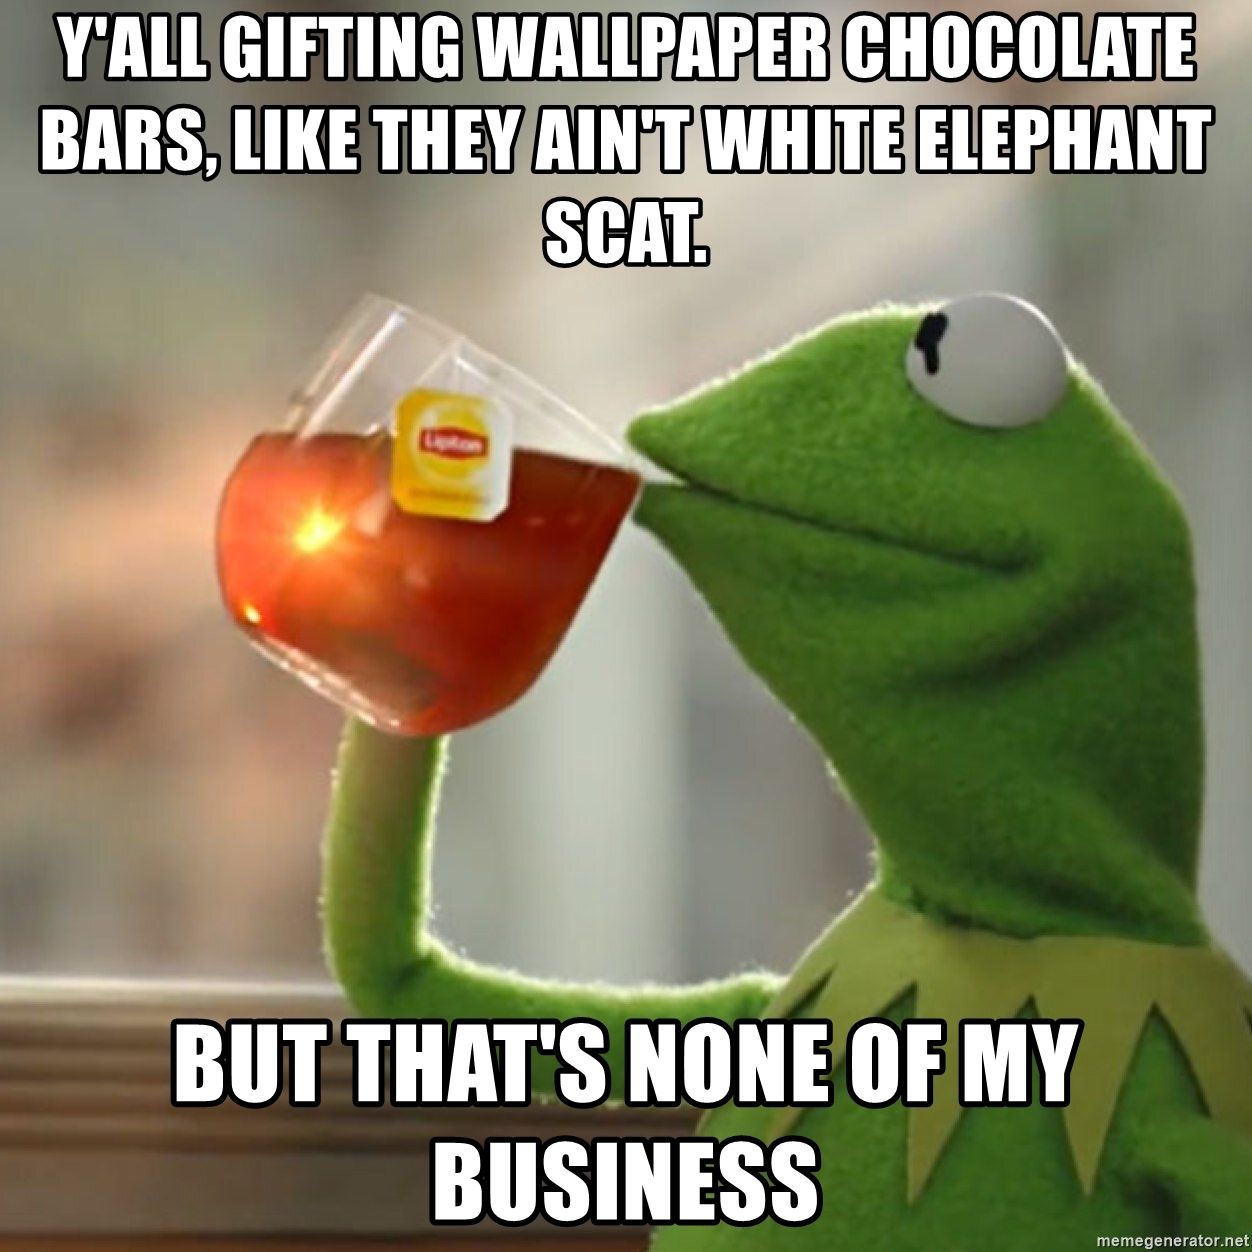 Y'all gifting wallpaper chocolate bars, like they ain't white elephant scat. but that's none of my business Kermit the Frog